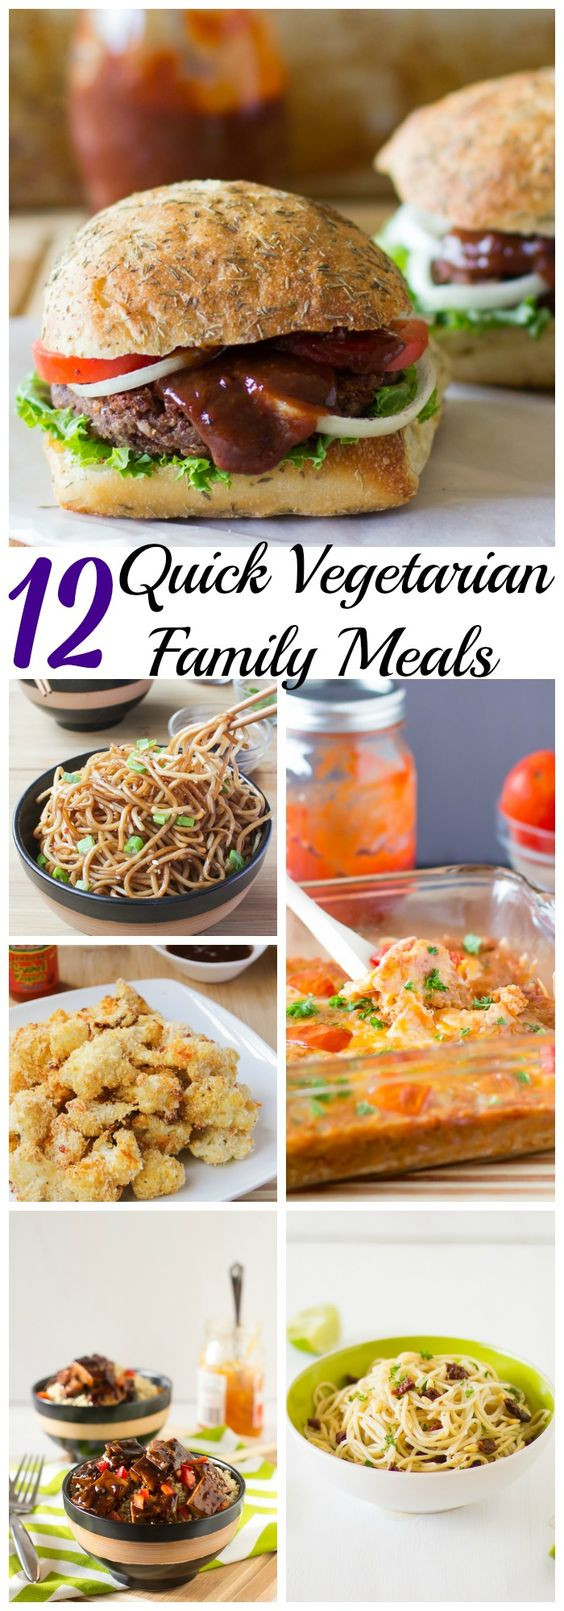 Family Vegetarian Recipes
 12 Quick Ve arian Family Meals